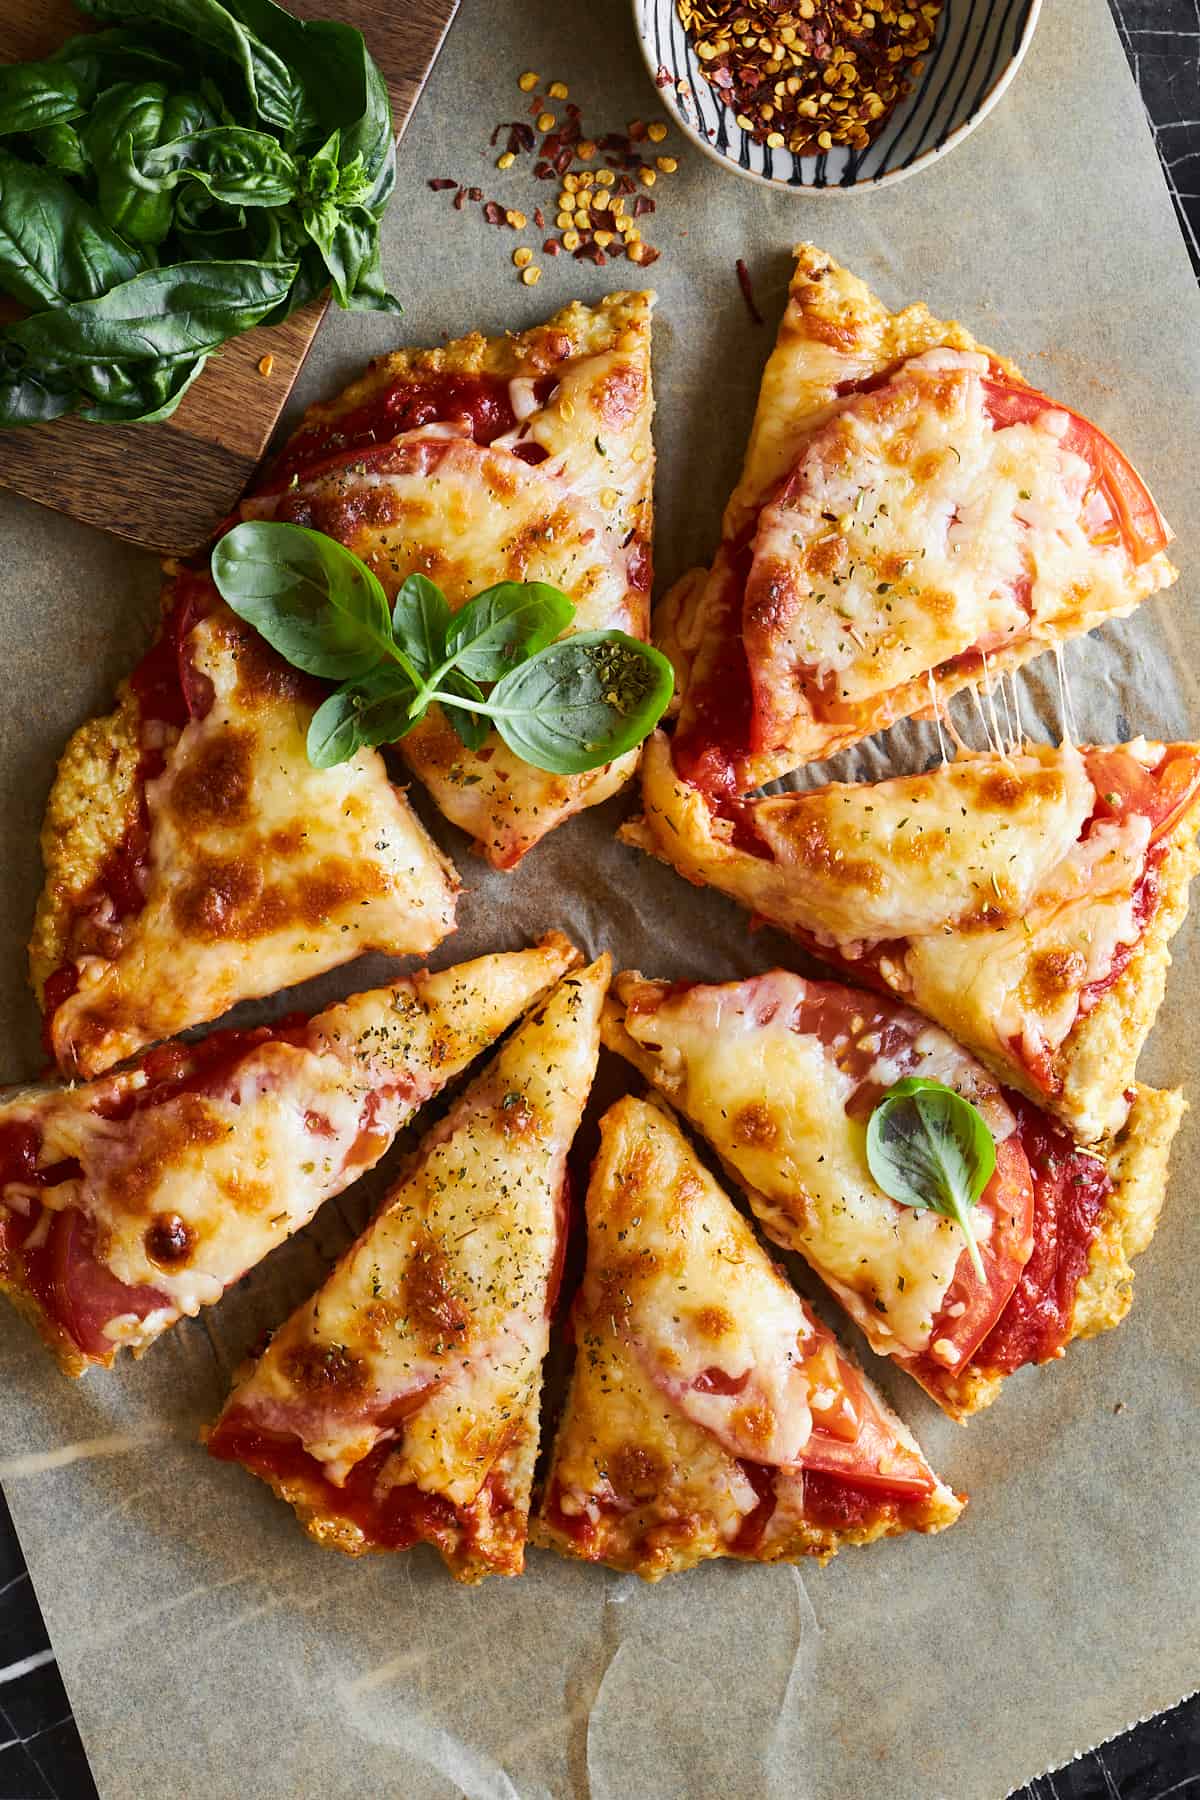 Chicken crust pizza sliced into 8 pieces. 